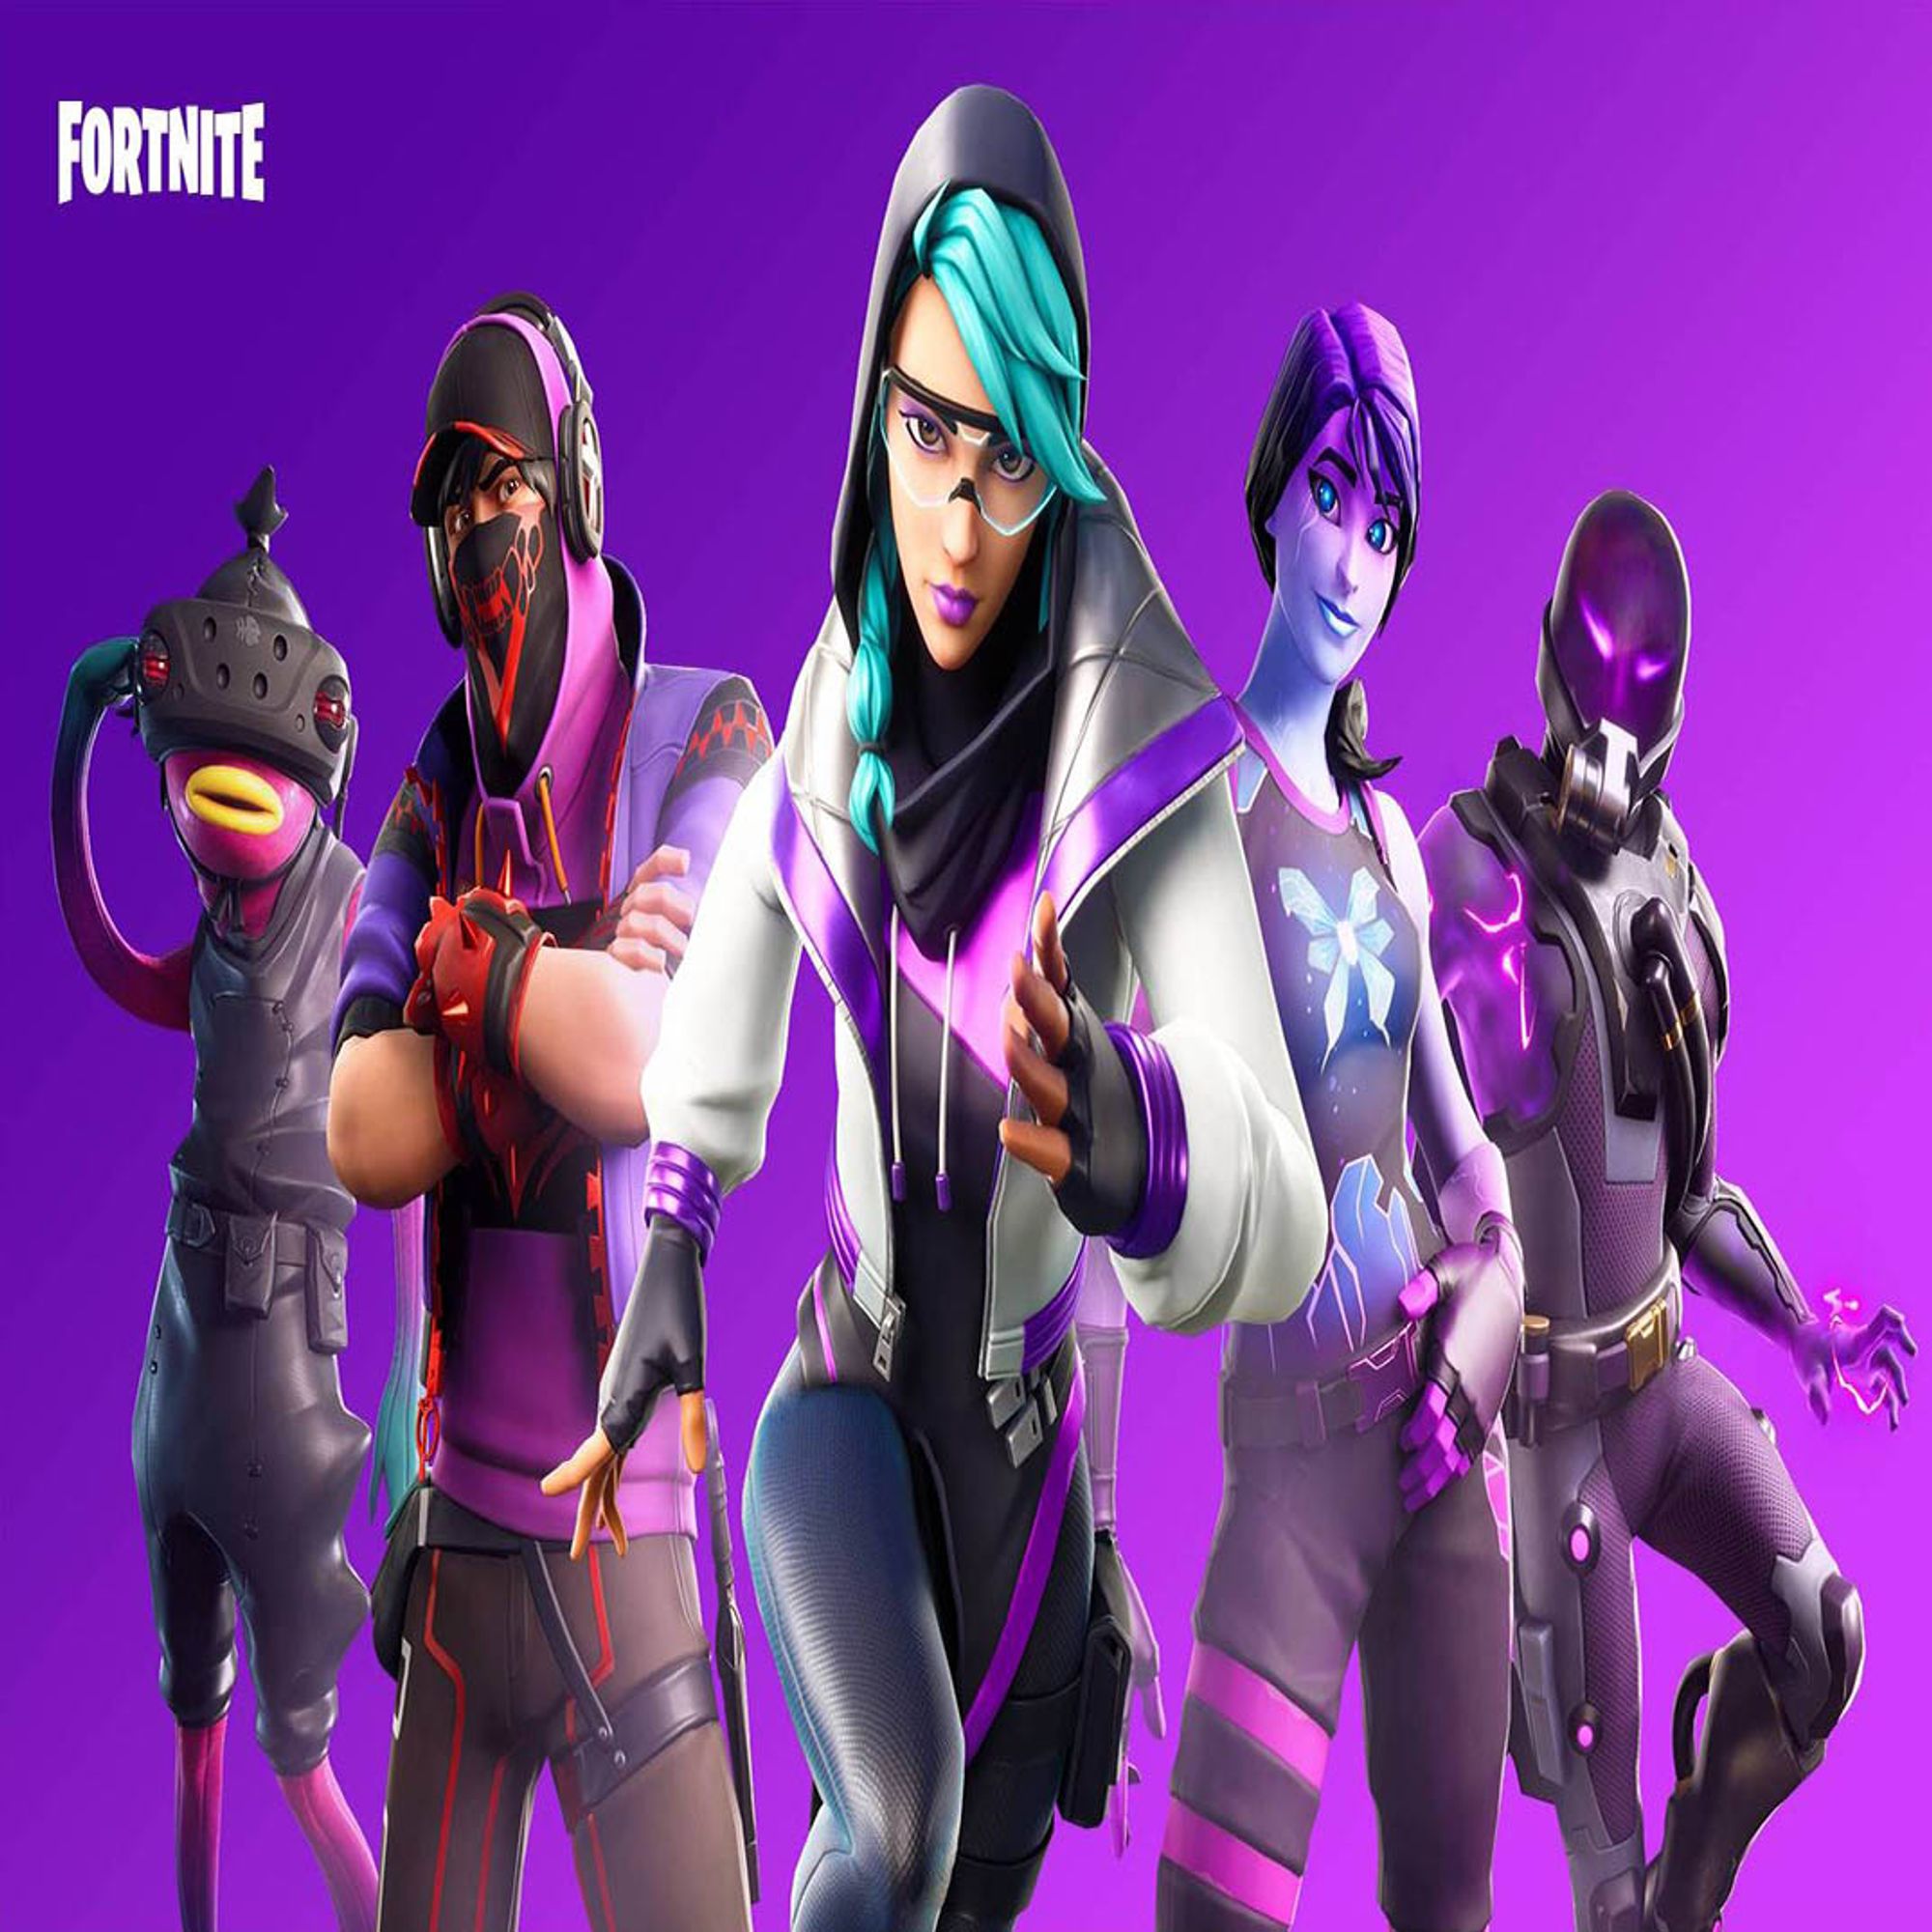 Free Fortnite Account Generator With Skins 2020